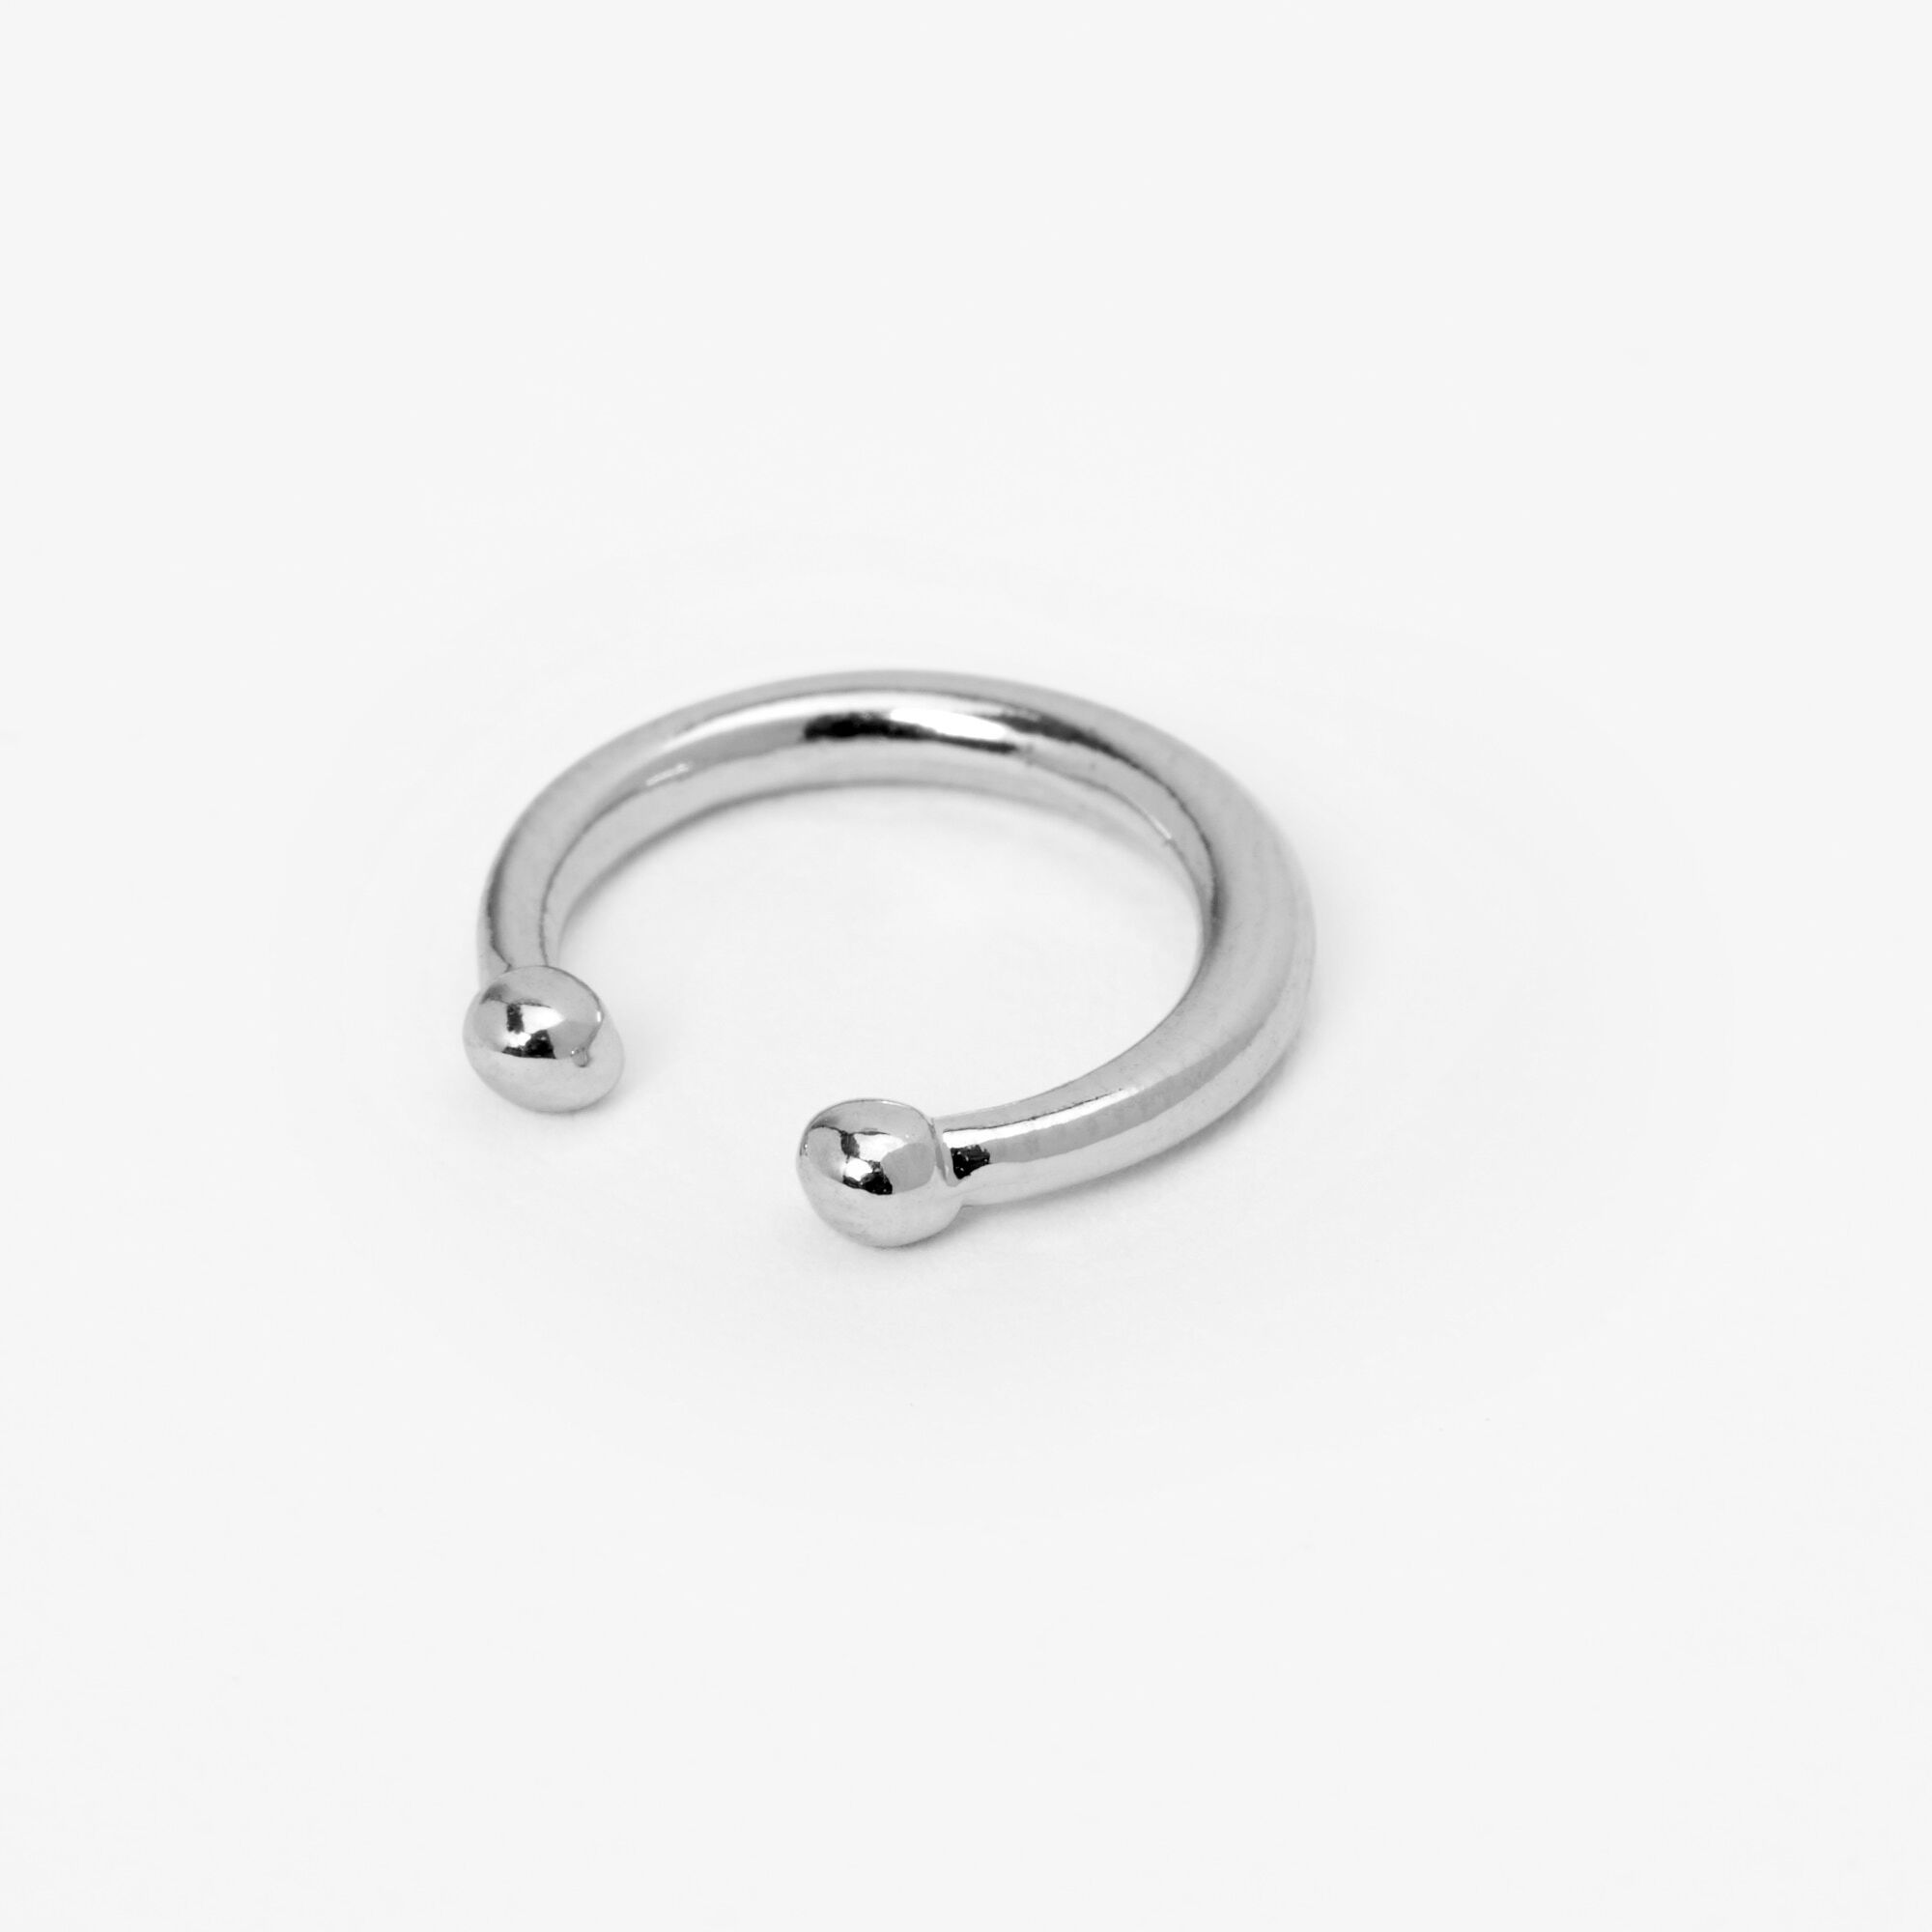 View Claires Thin Horseshoe Septum Nose Ring Silver information